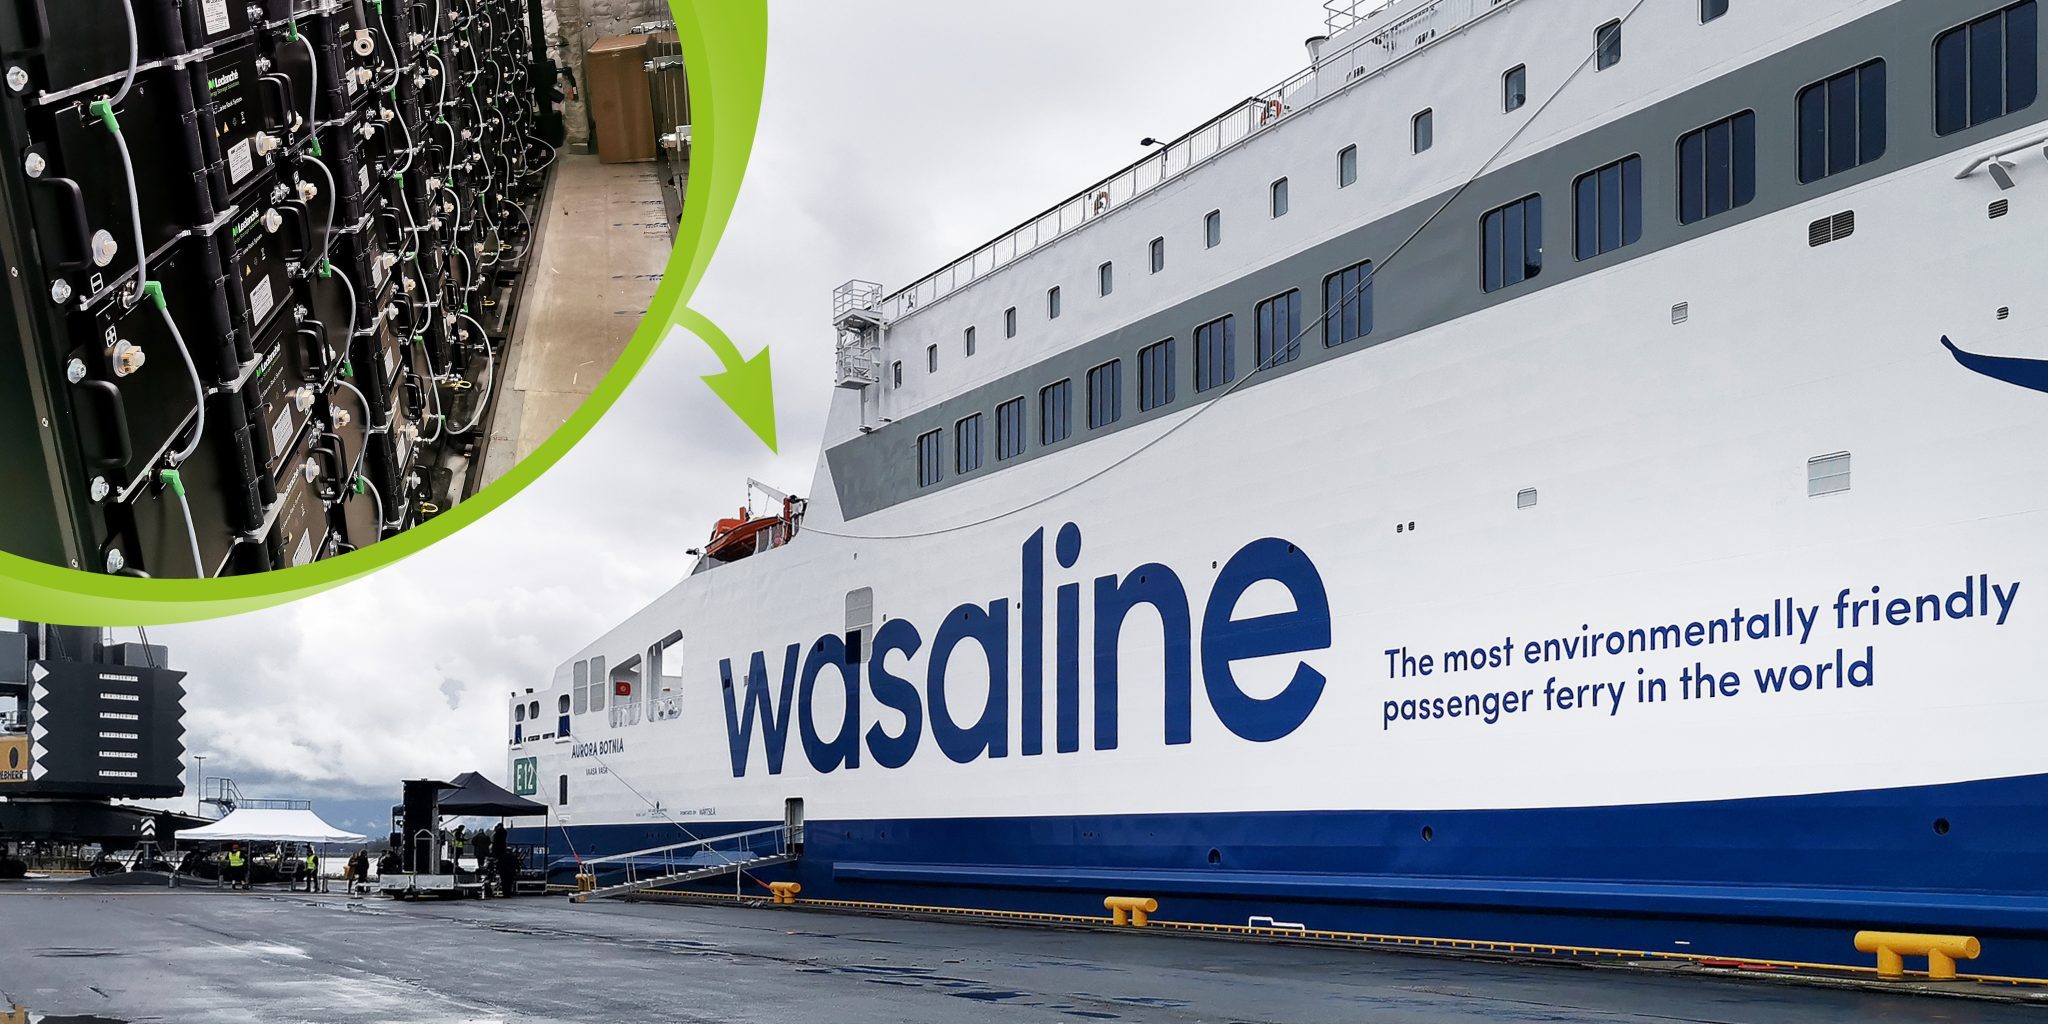 Wasaline ship at port together with an image of a battery system.